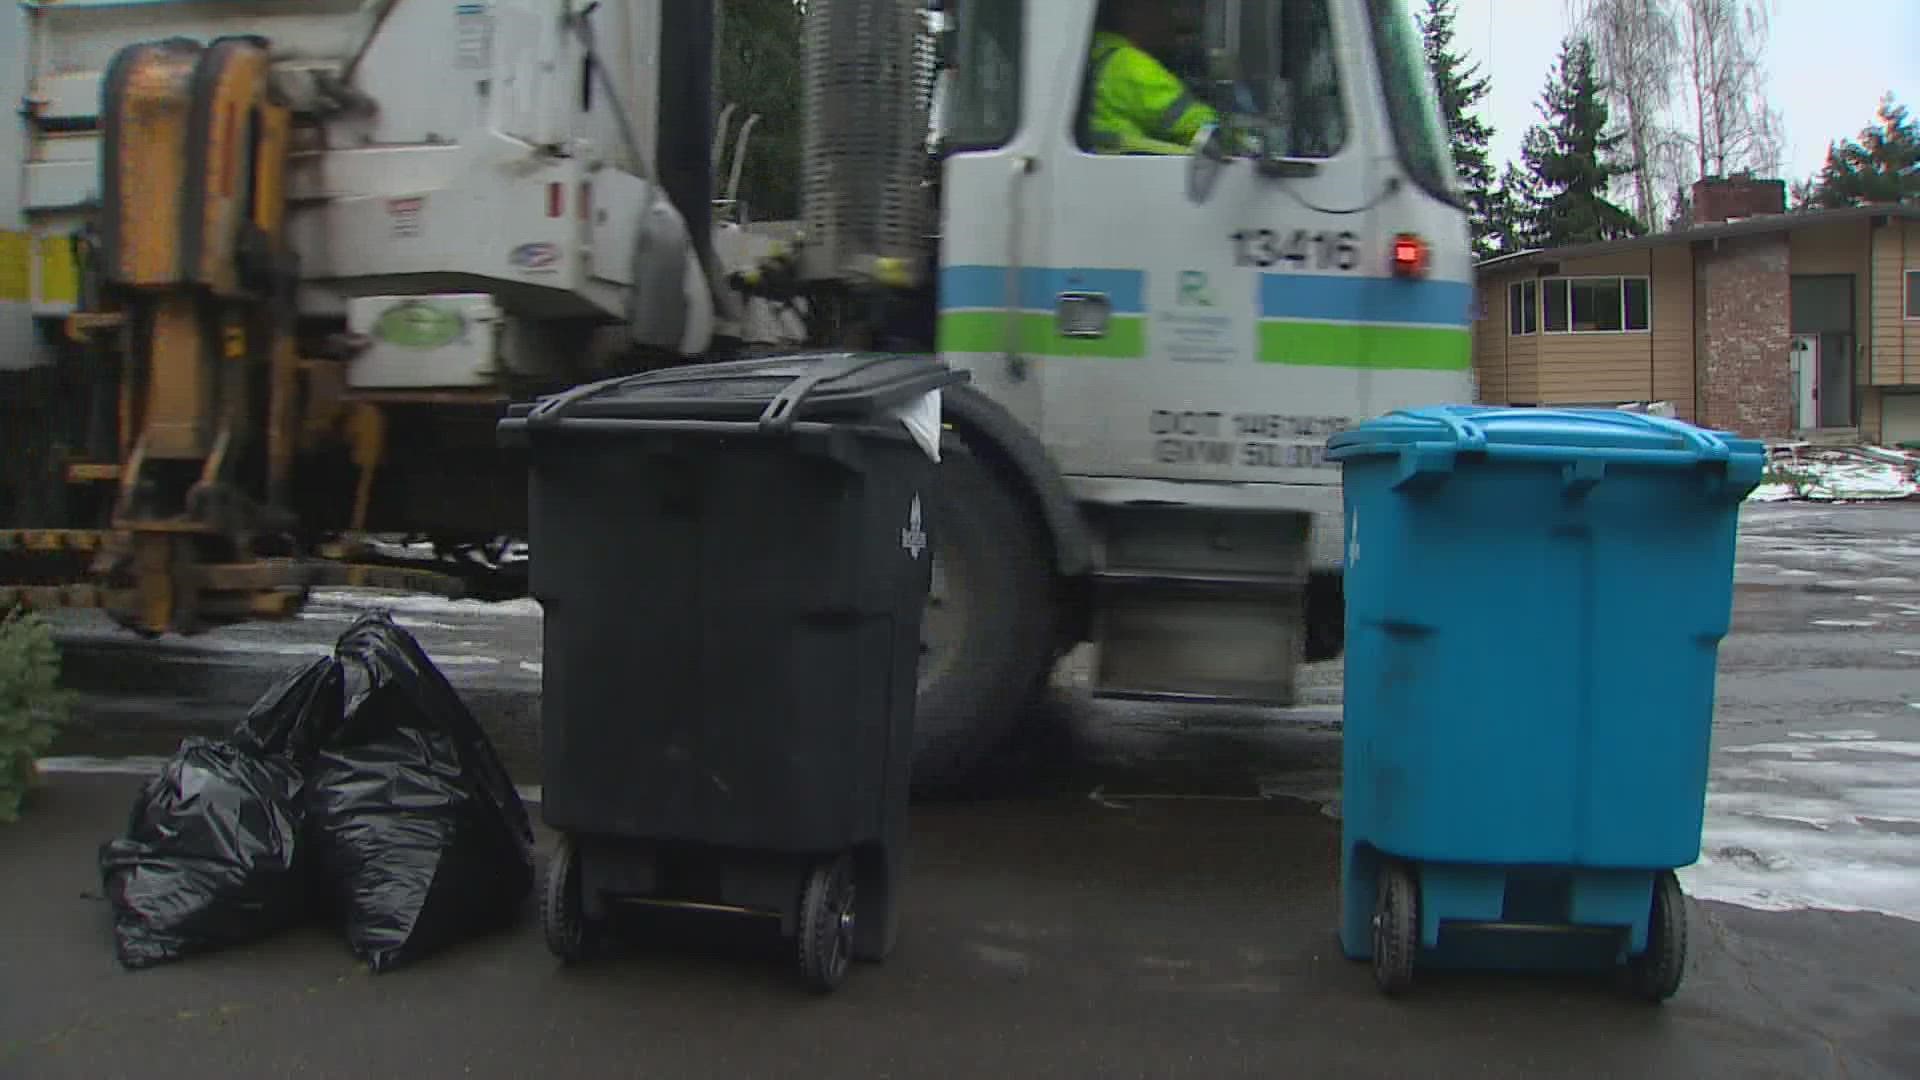 Unsafe road conditions following recent snowstorms have continued to delay trash services across western Washington.